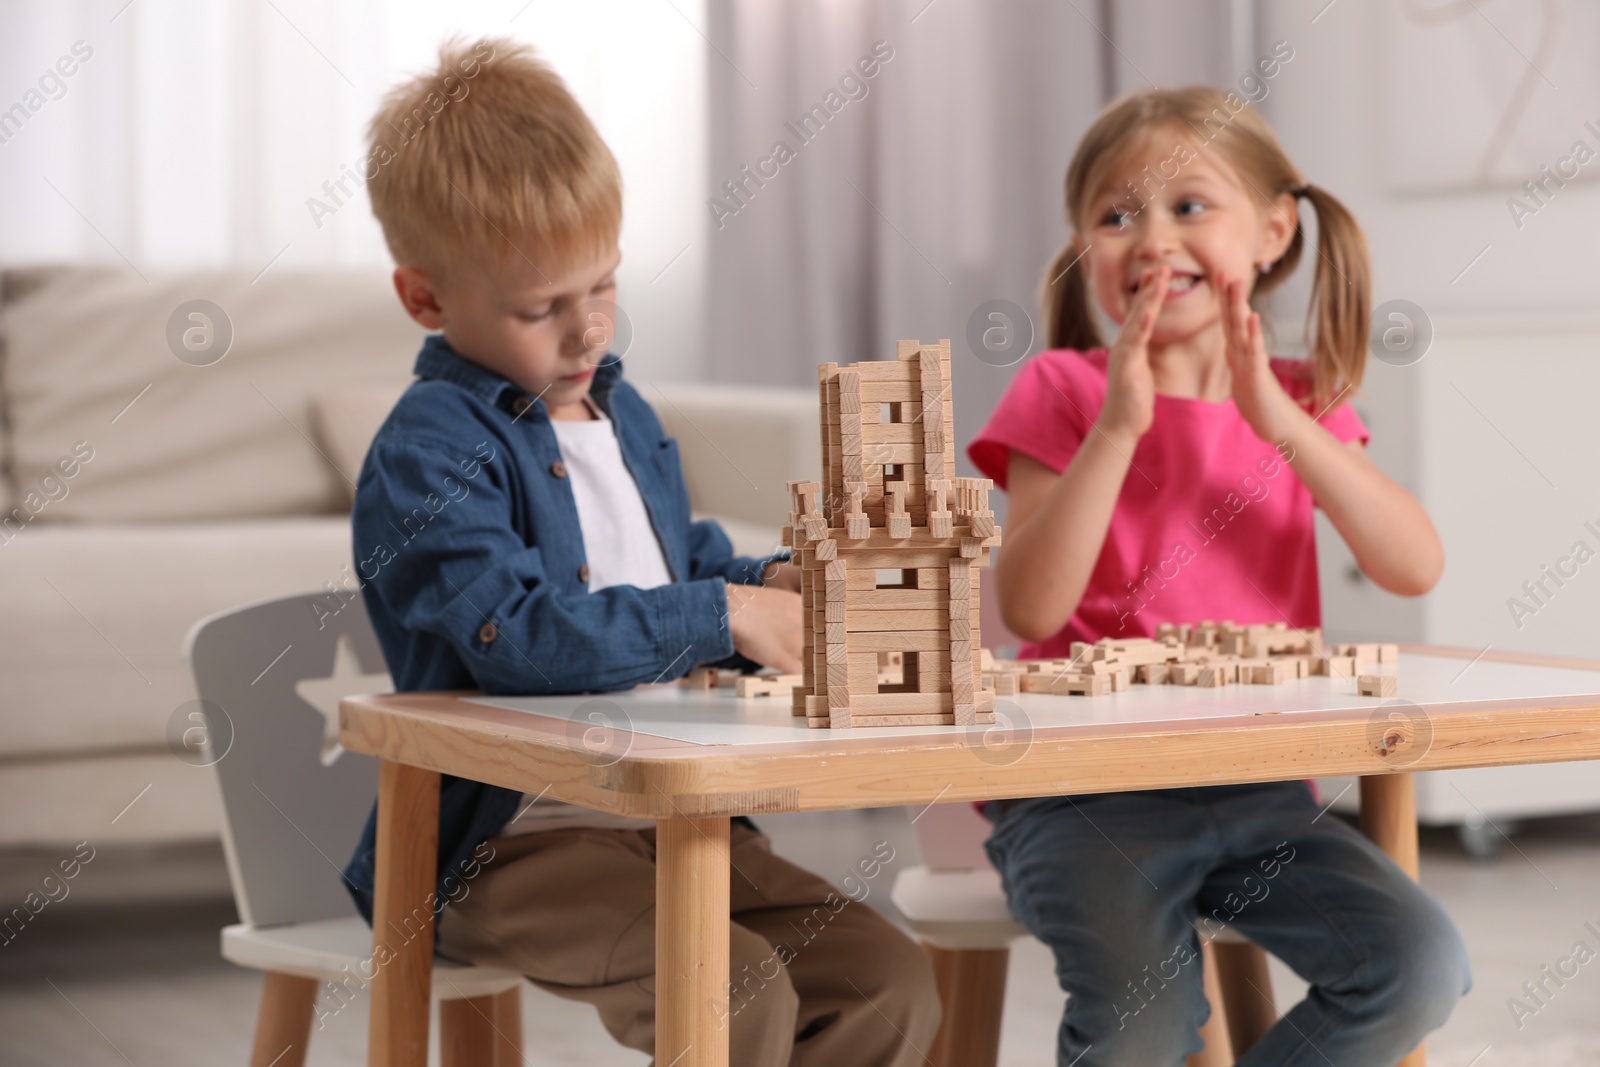 Photo of Little girl and boy playing with wooden tower at table indoors, selective focus. Children's toy